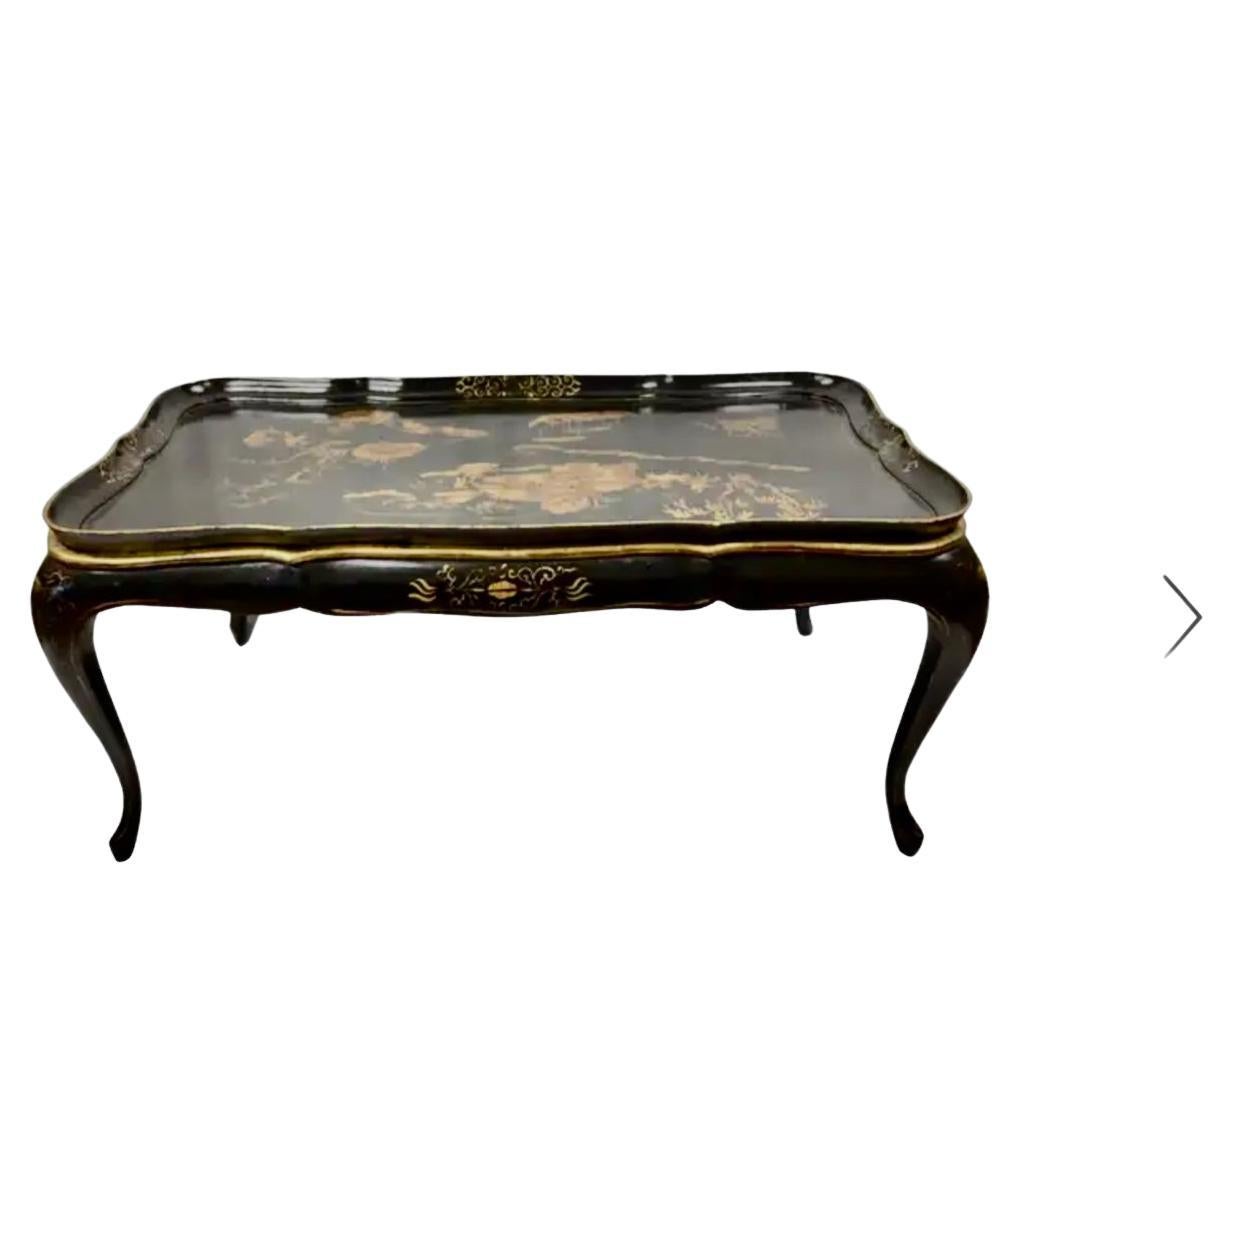 19th Century English Chinoiserie lacquered coffee table with hand painted floral design. Top features a hand-painted Chinese landscape and water scene in gold on a black background. Wooden apron has gold floral design. Cabriole legs are are black